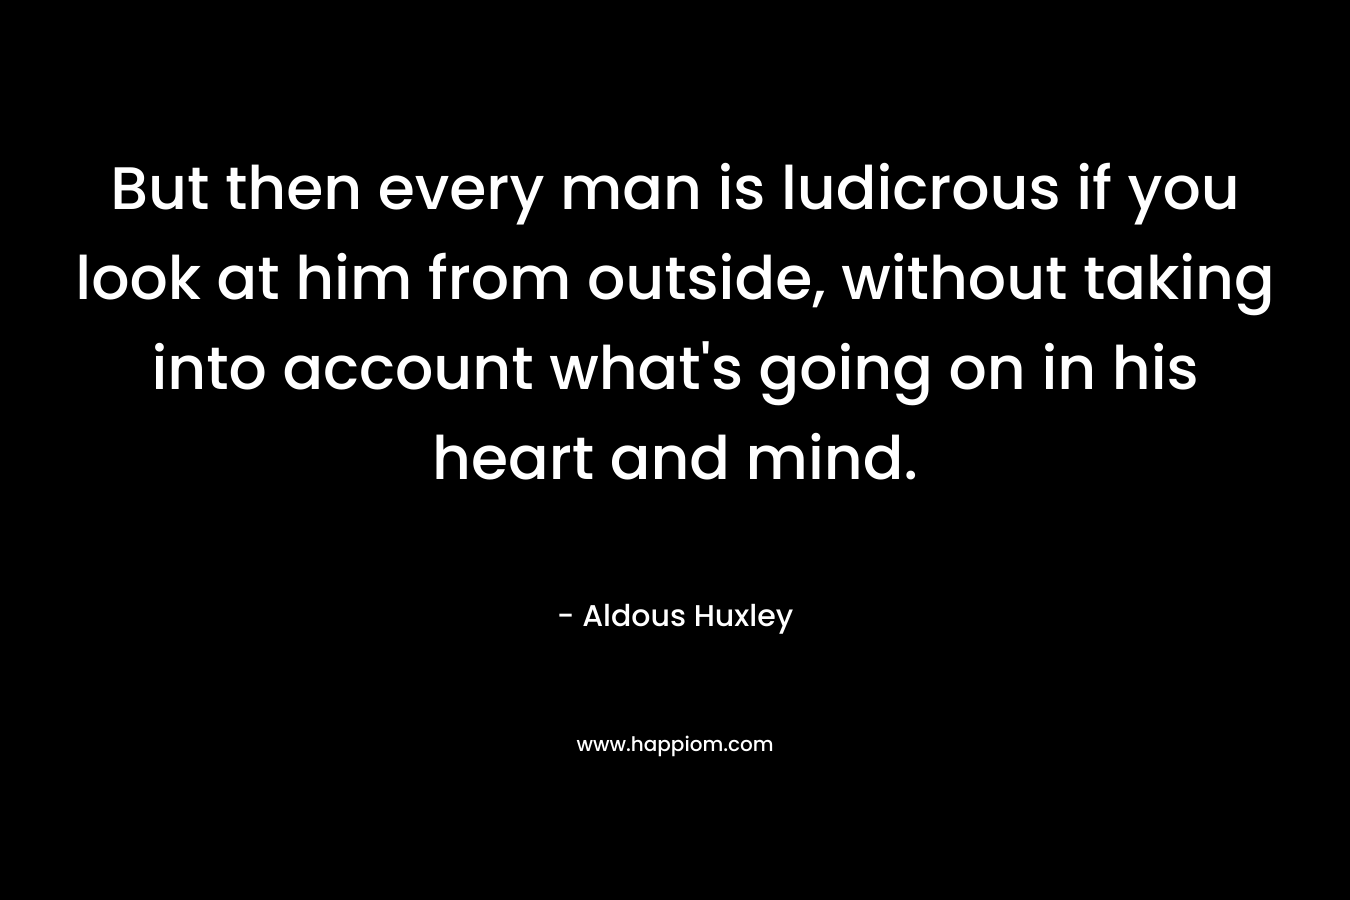 But then every man is ludicrous if you look at him from outside, without taking into account what's going on in his heart and mind.